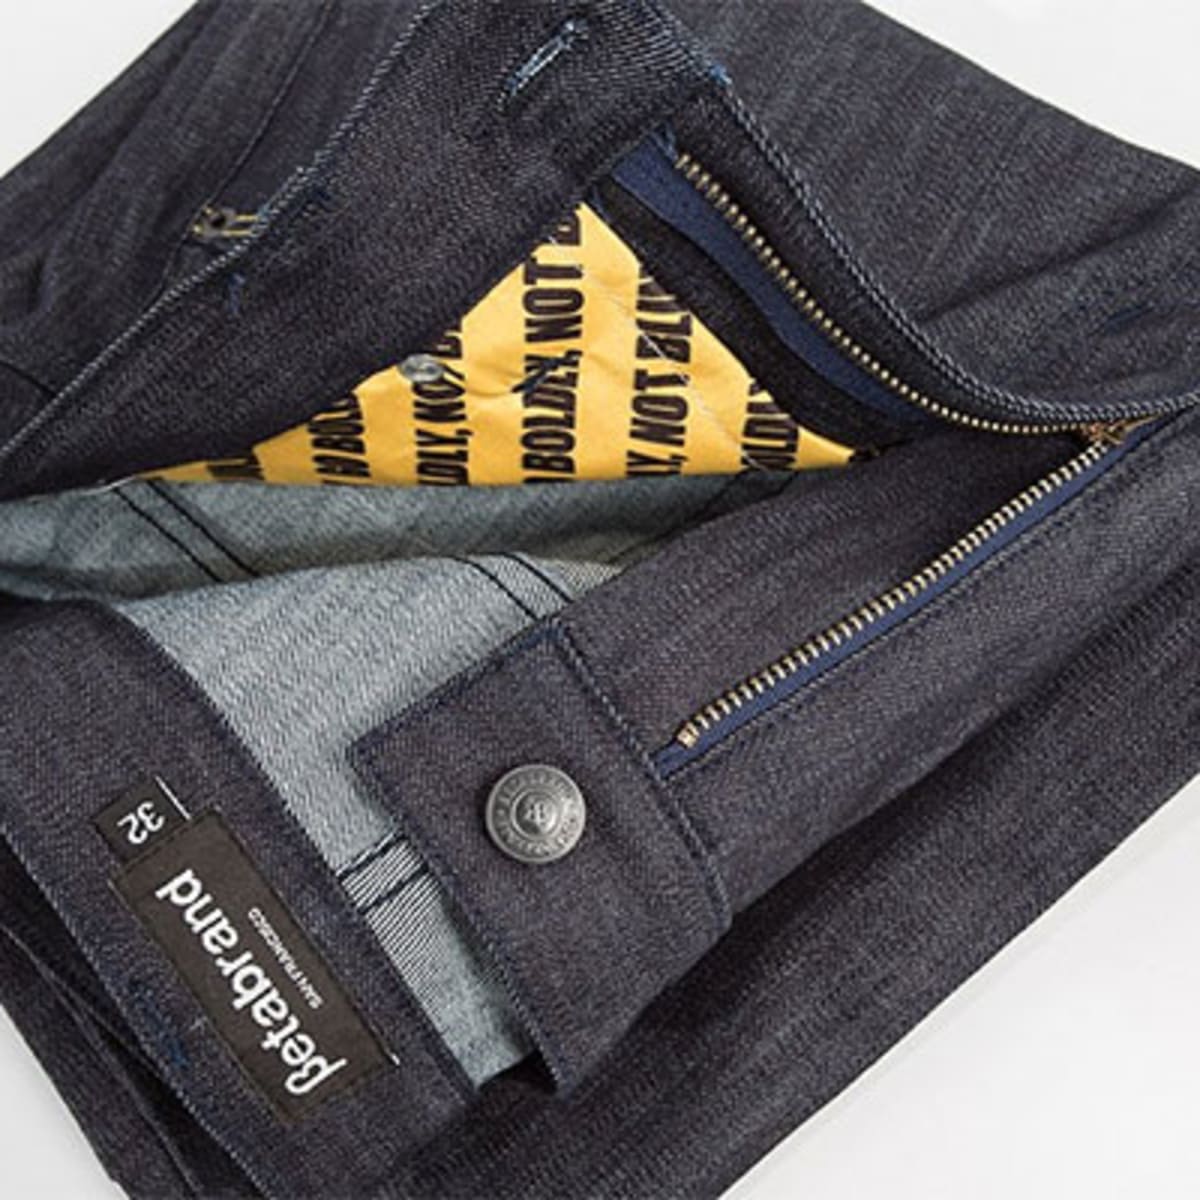 Hack-Proof Pants Protect Your Credit Cards from Digital